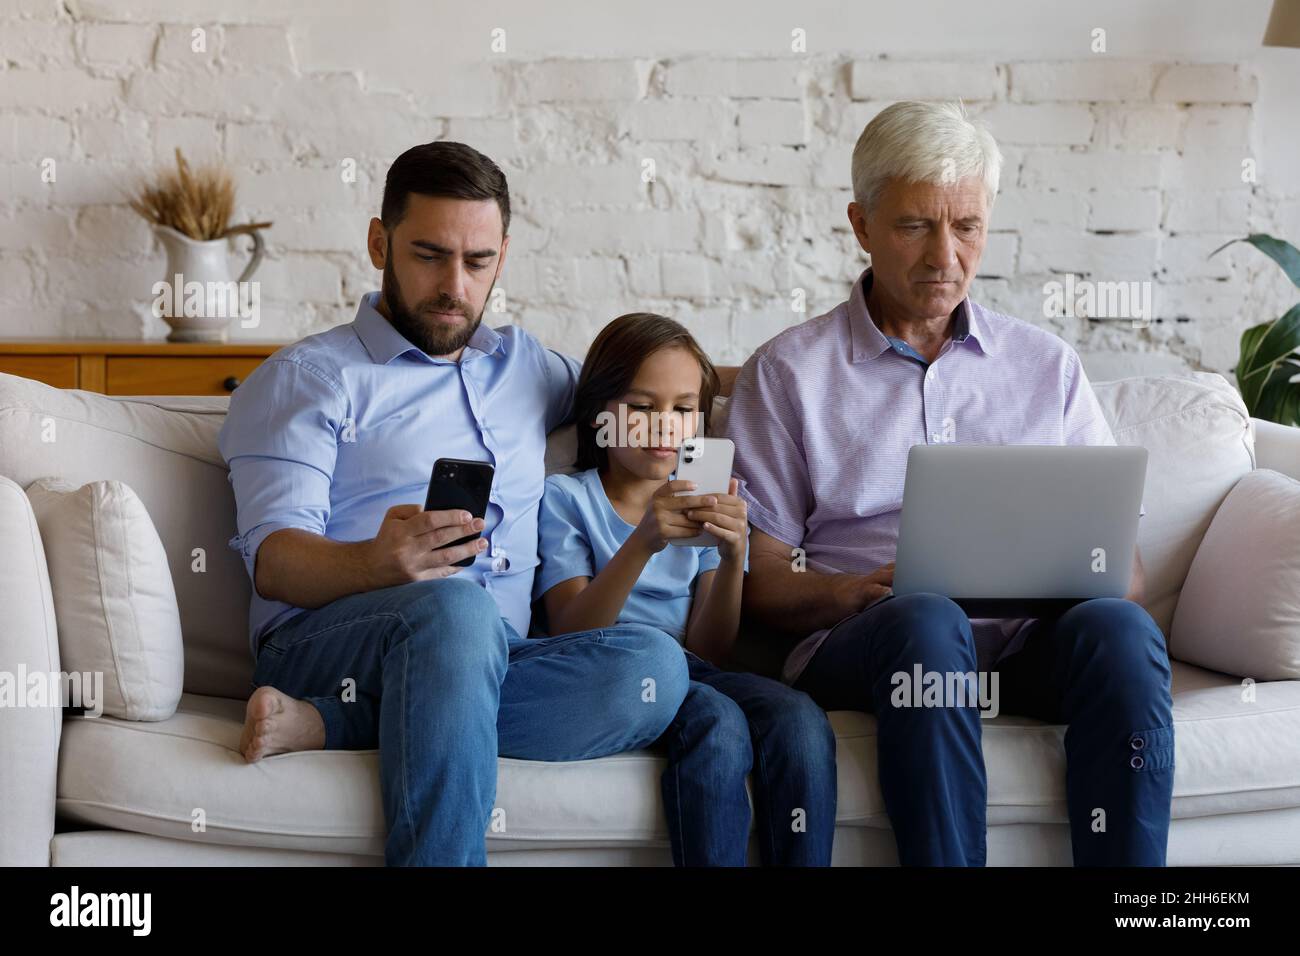 Digital addicted three male family generations using devices at home Stock Photo